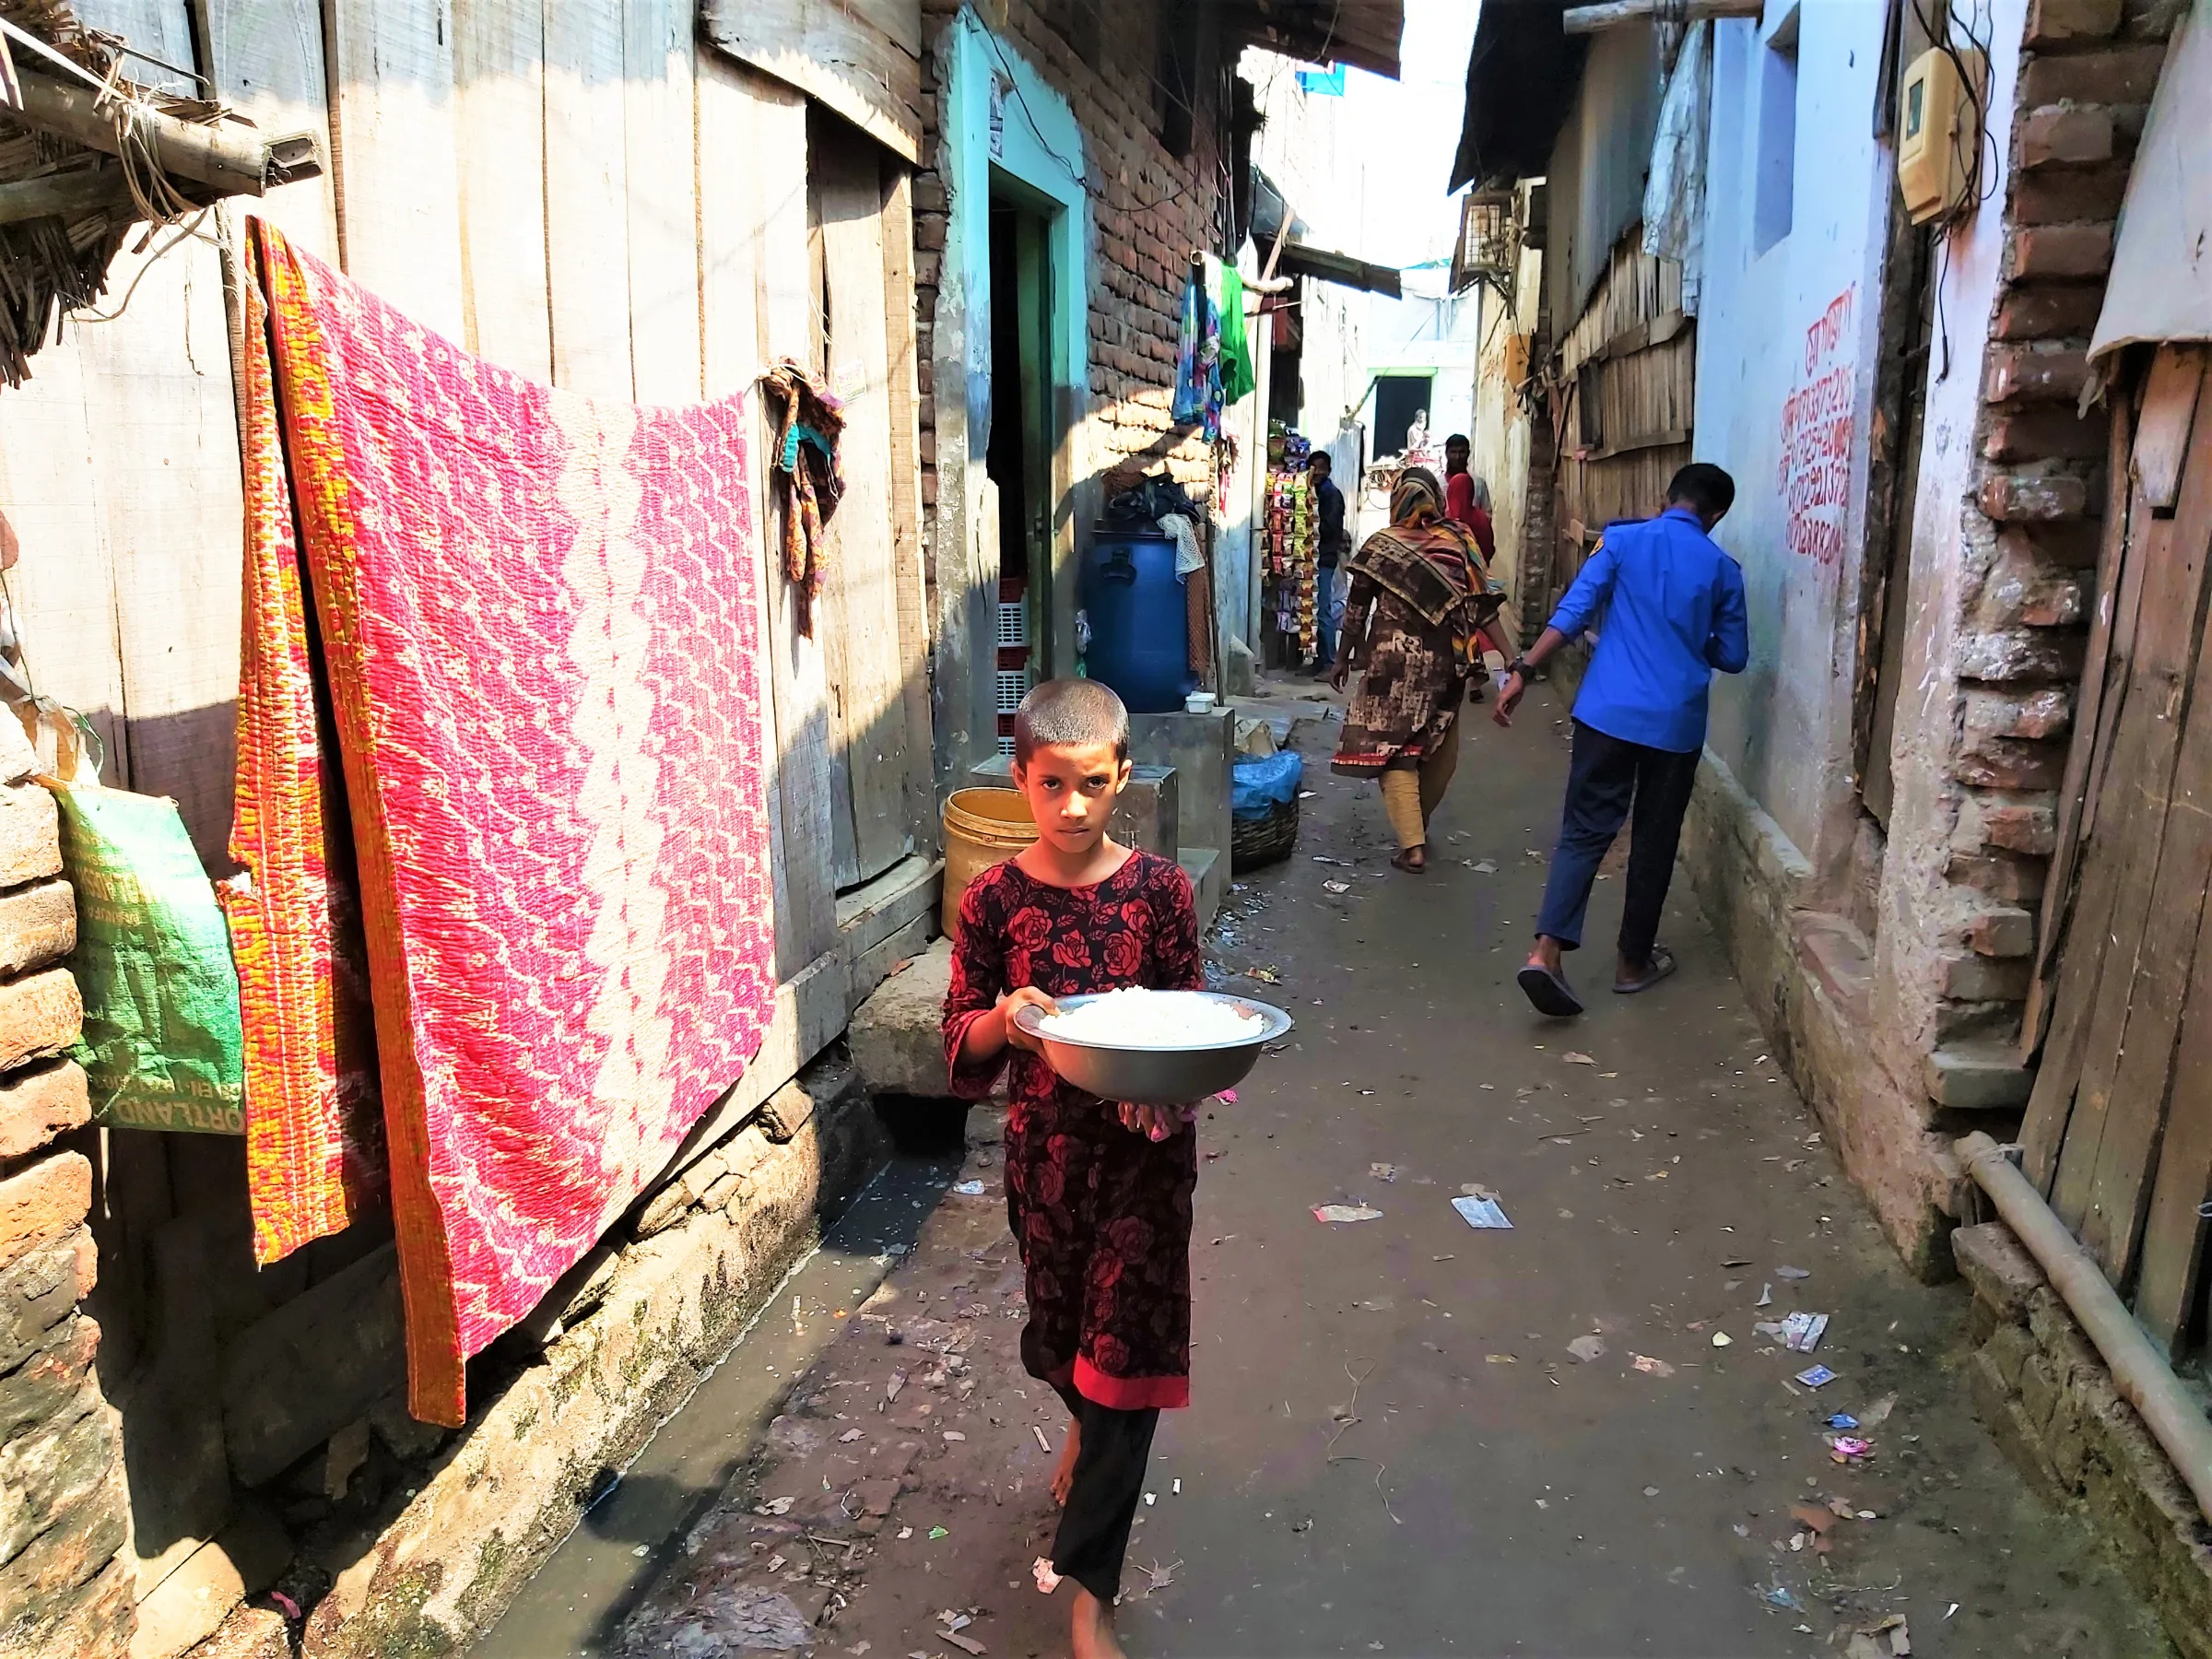 A child stands holding a bowl of rice in a narrow street of shacks